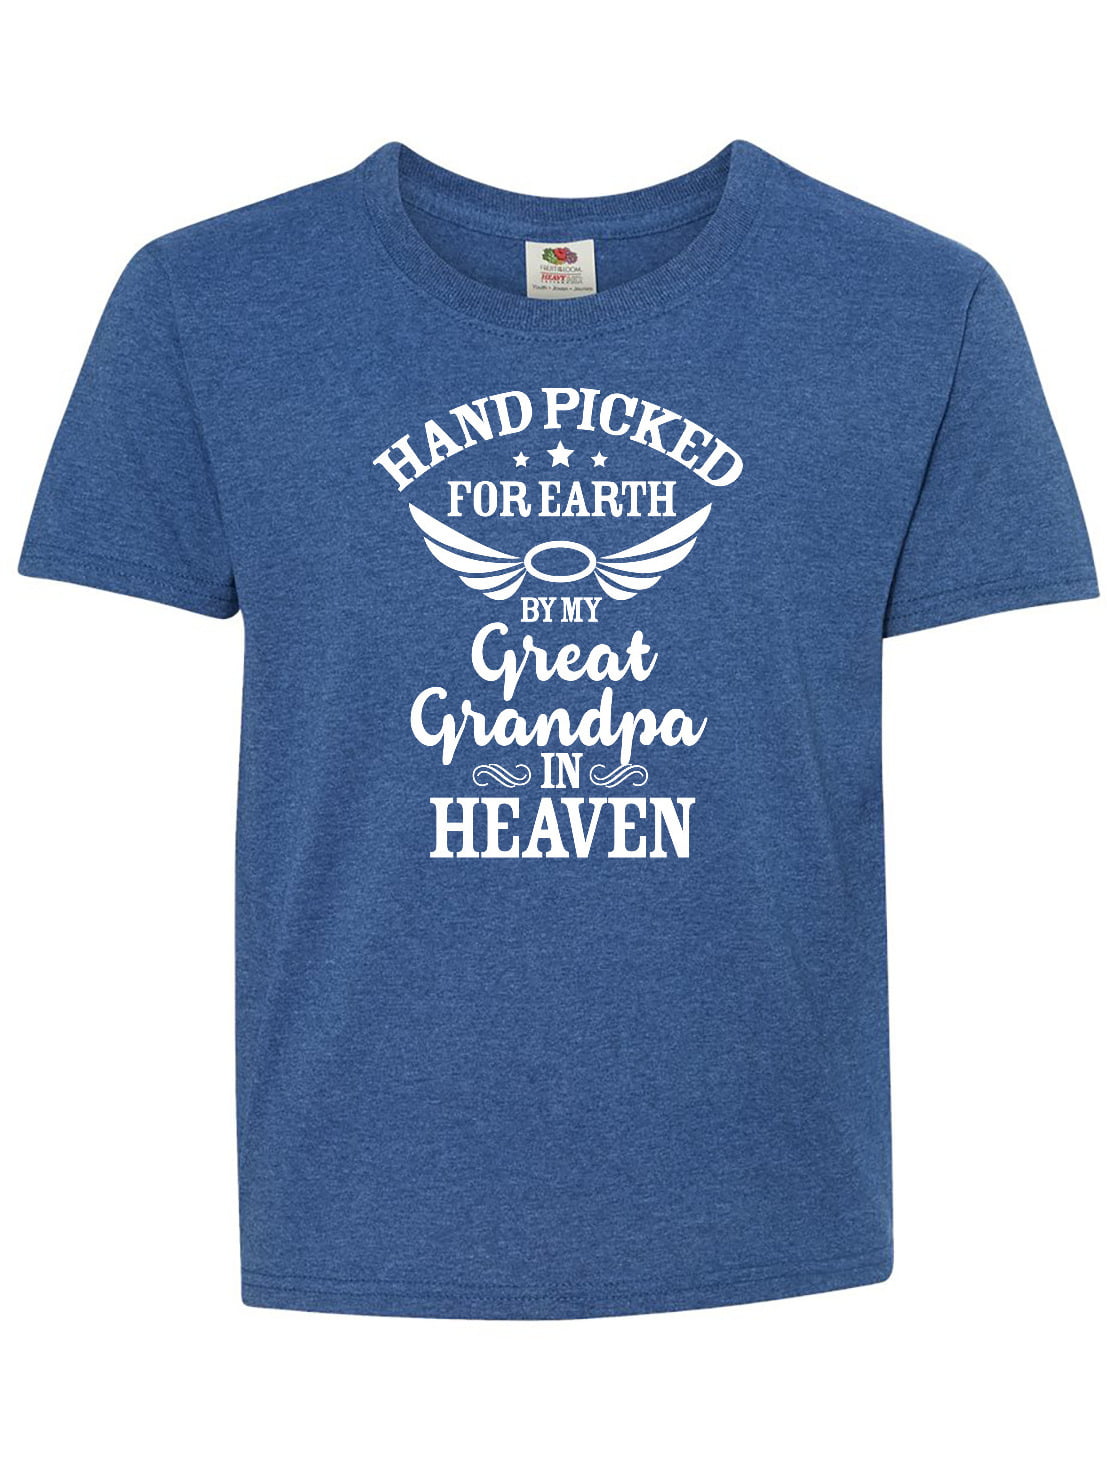 Handpicked for Earth By My Great Grandpa in Heaven Youth T-Shirt ...